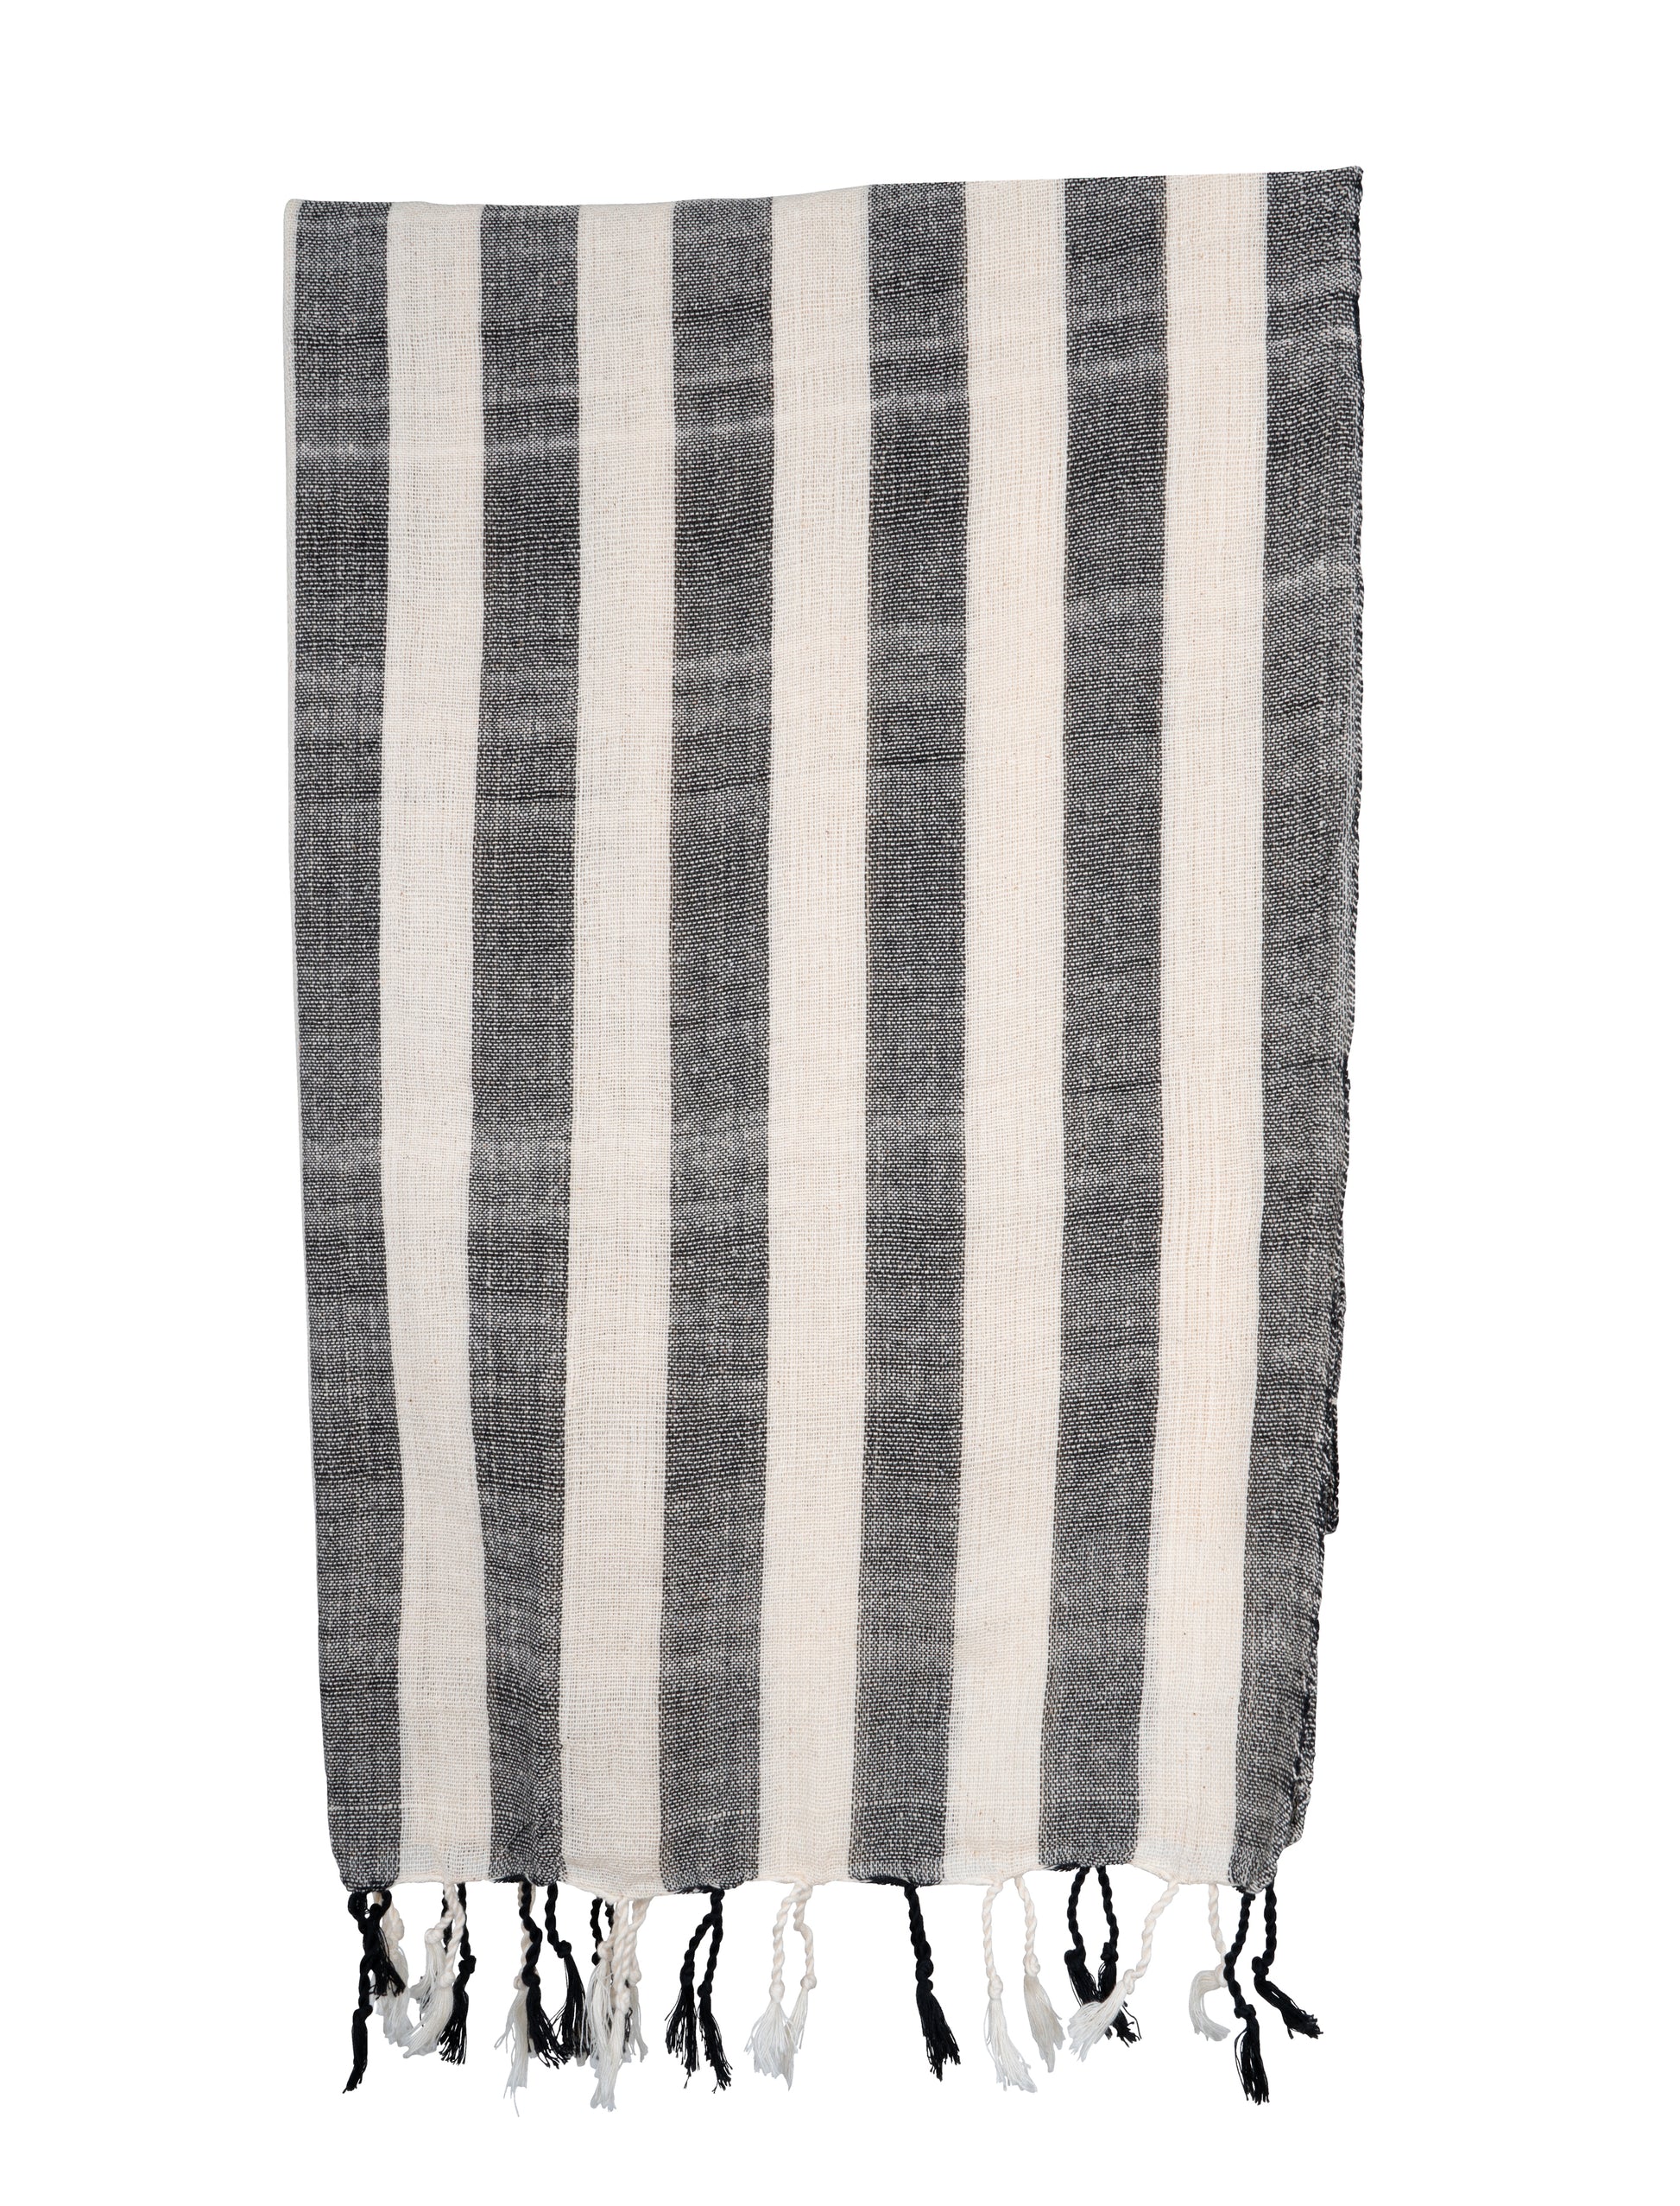 striped black white Natural Dyed Handspun Handwoven Cotton Scarf & Shawls Patterned - CCCollections